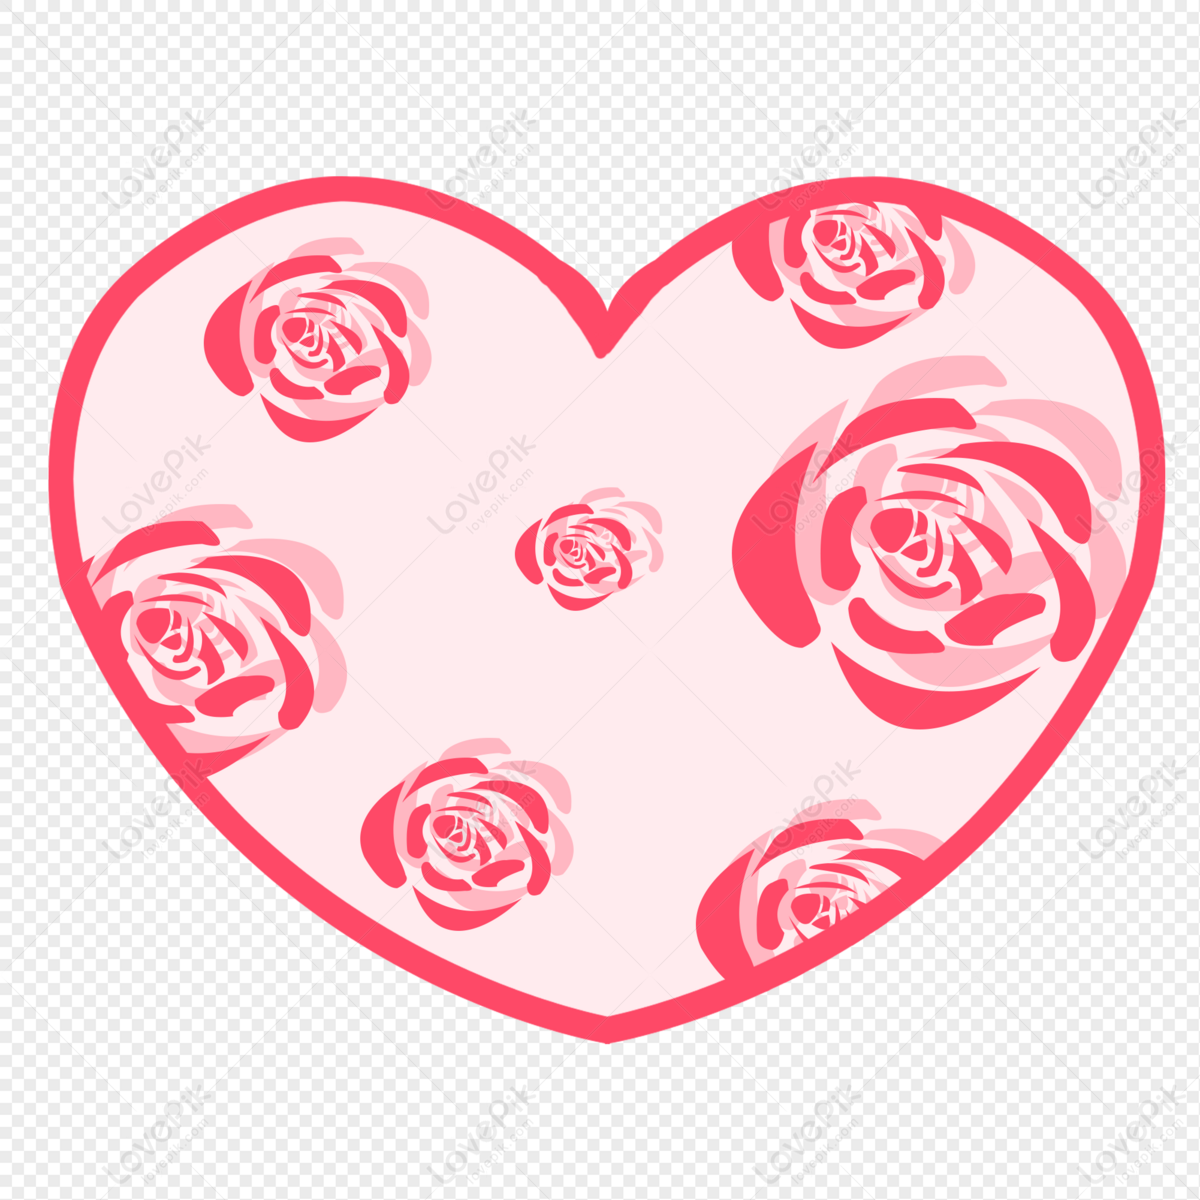 Rose Heart PNG Hd Transparent Image And Clipart Image For Free Download ...